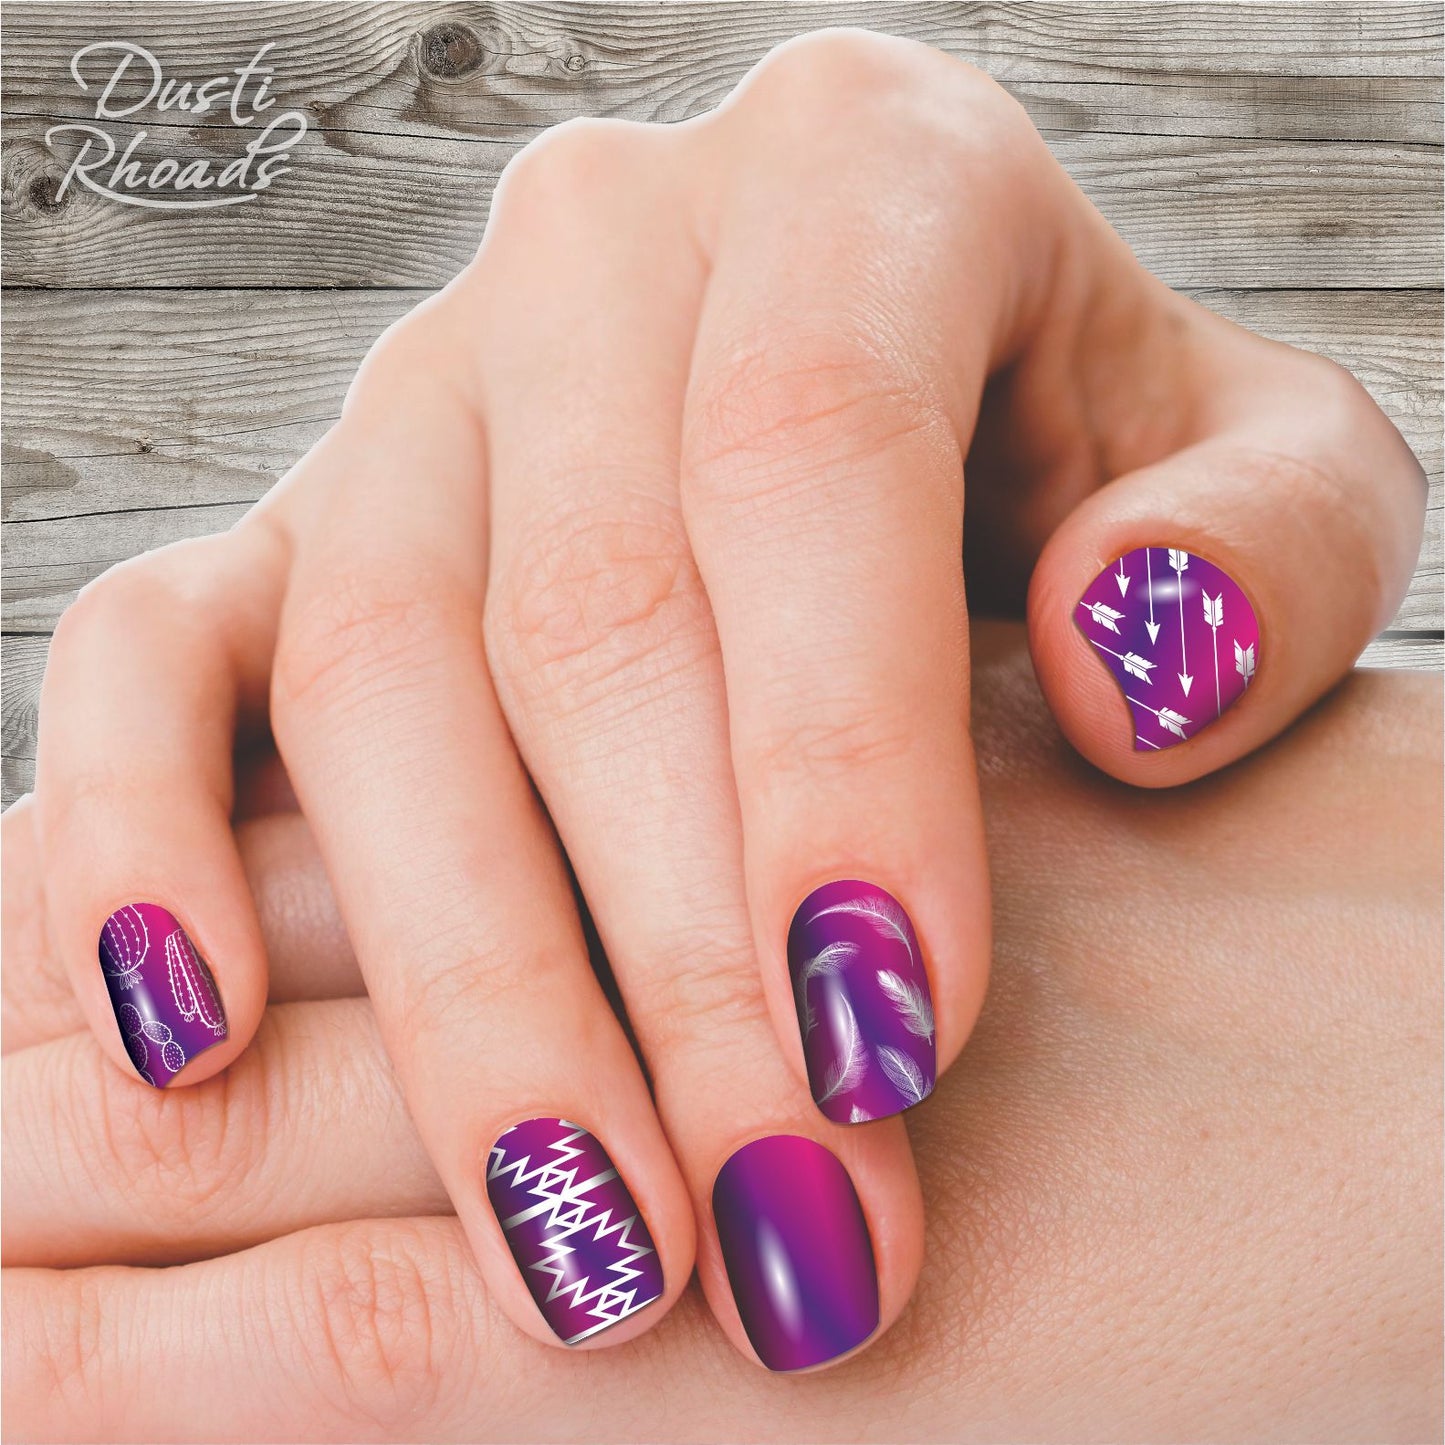 Ogallala Nail Strip - Only 2 left!